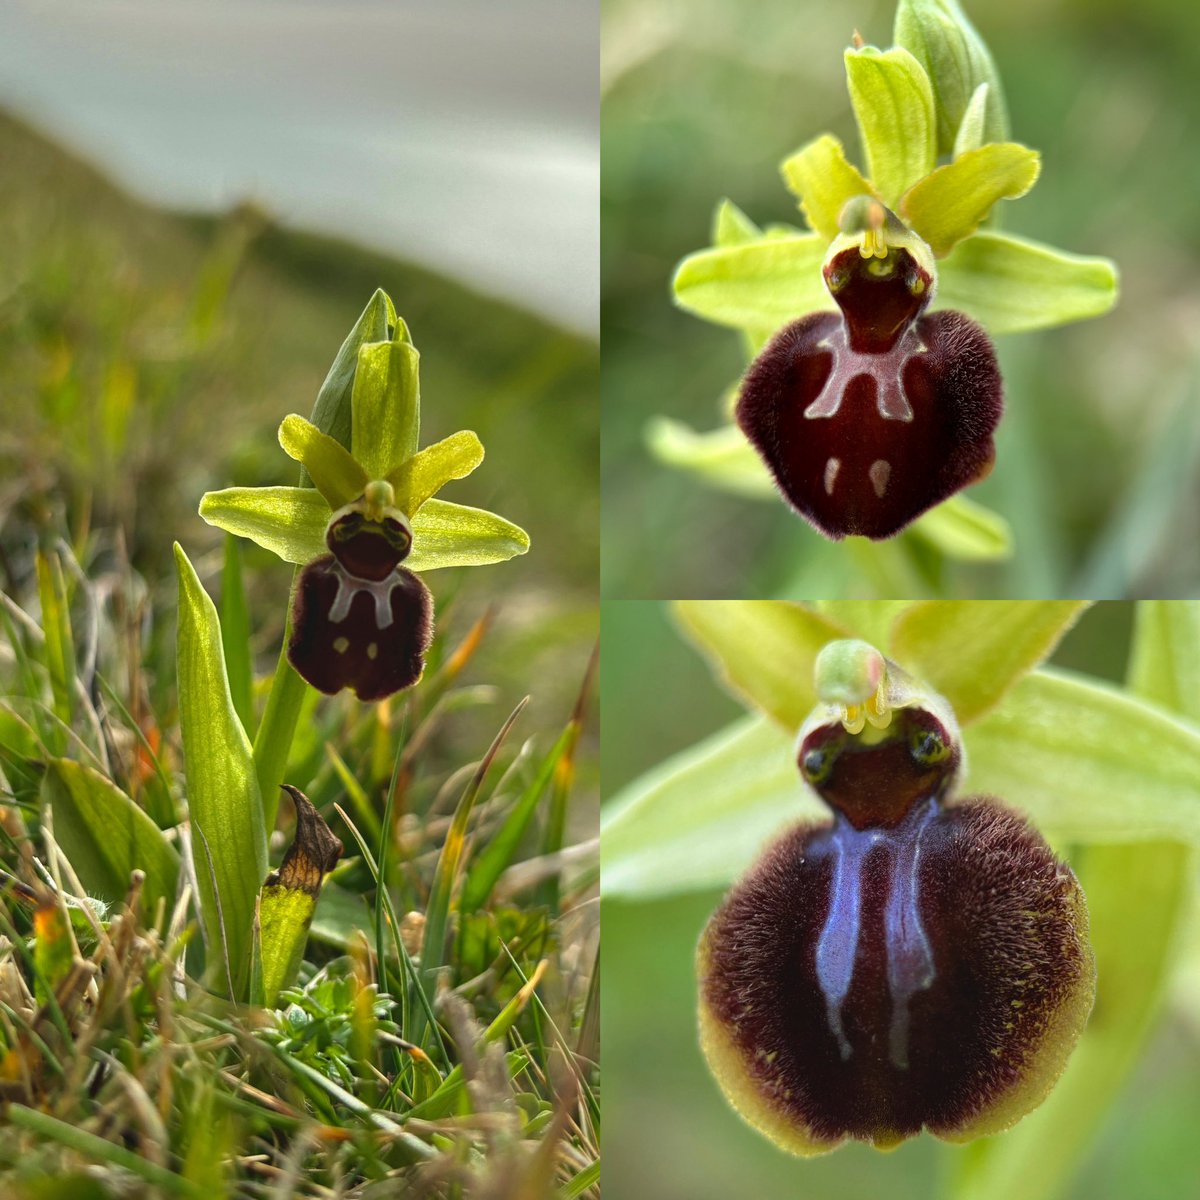 More of the Early Spider Orchids (Ophrys sphegodes) doing their best to attract male bees with their hairiness, ‘wings’, ‘eyes’ and even (apparently) mimicking the pheromones of a female bee 🐝 @BSBIbotany @wildflower_hour